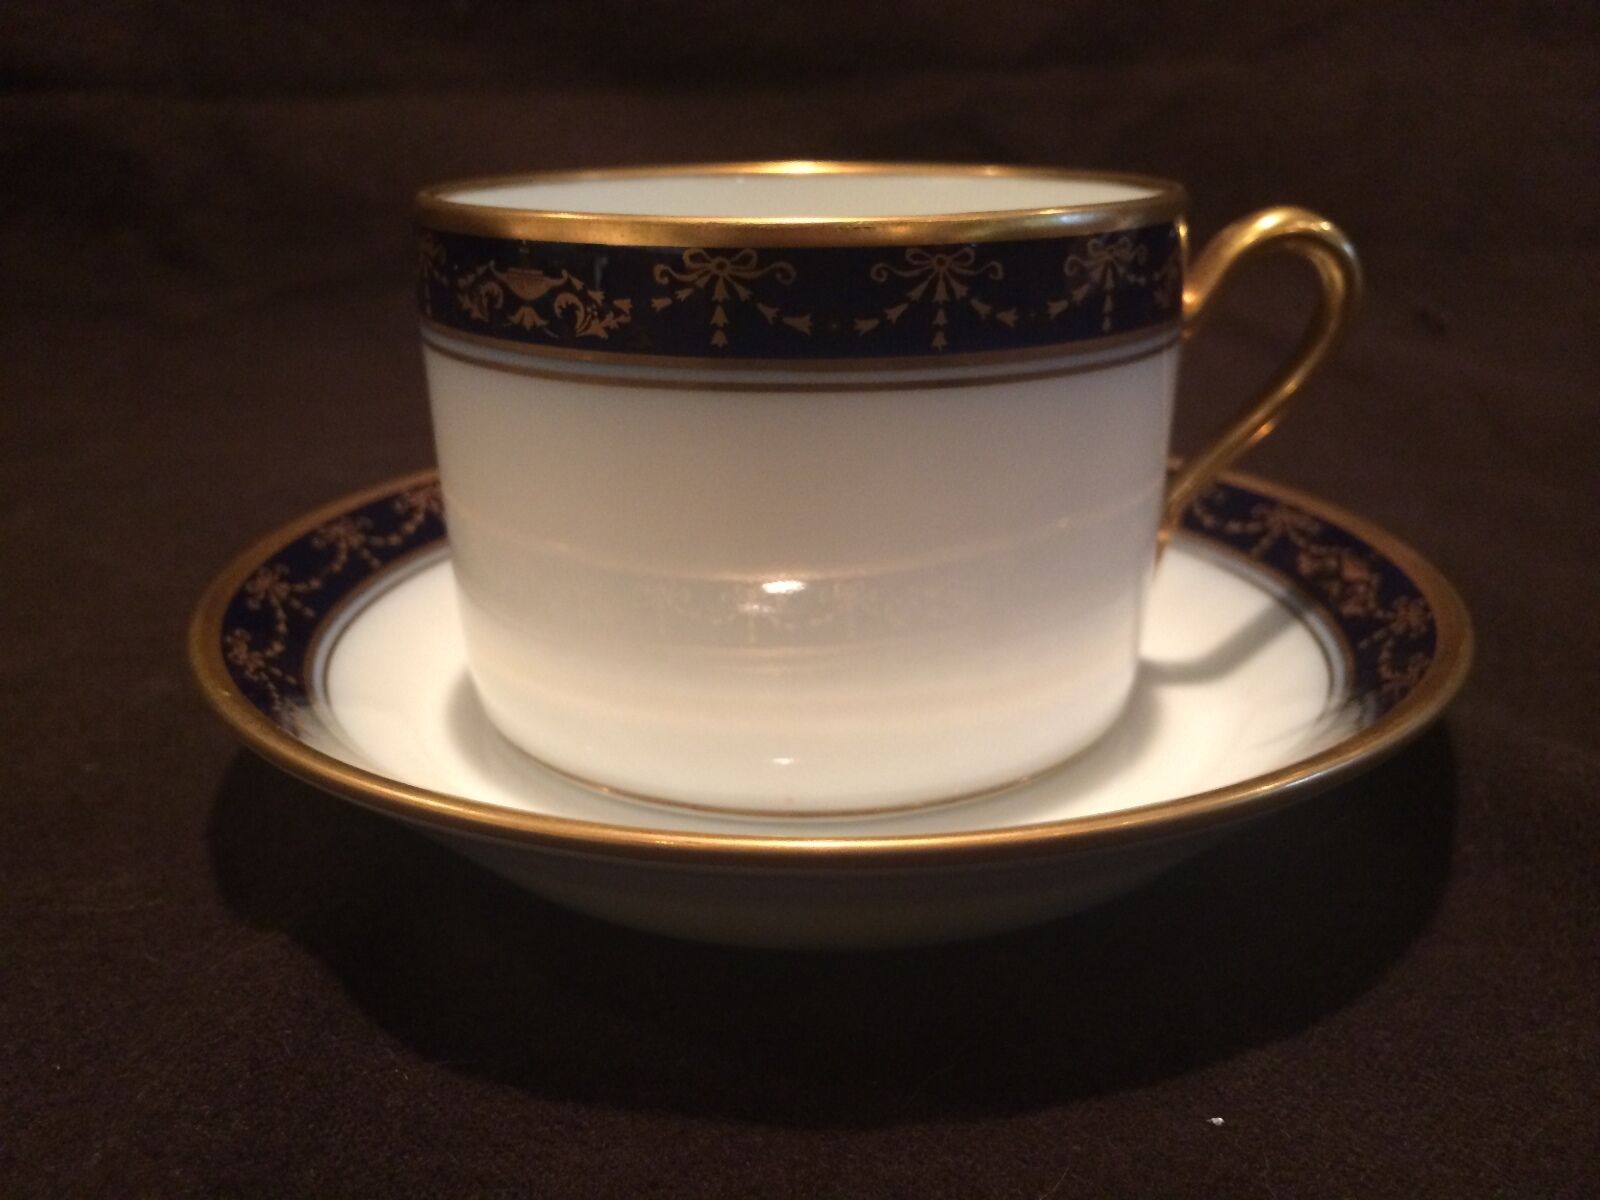 1 CUP AND SAUCER IN THE CASTELLO PATTERN BY RICHARD GINORI